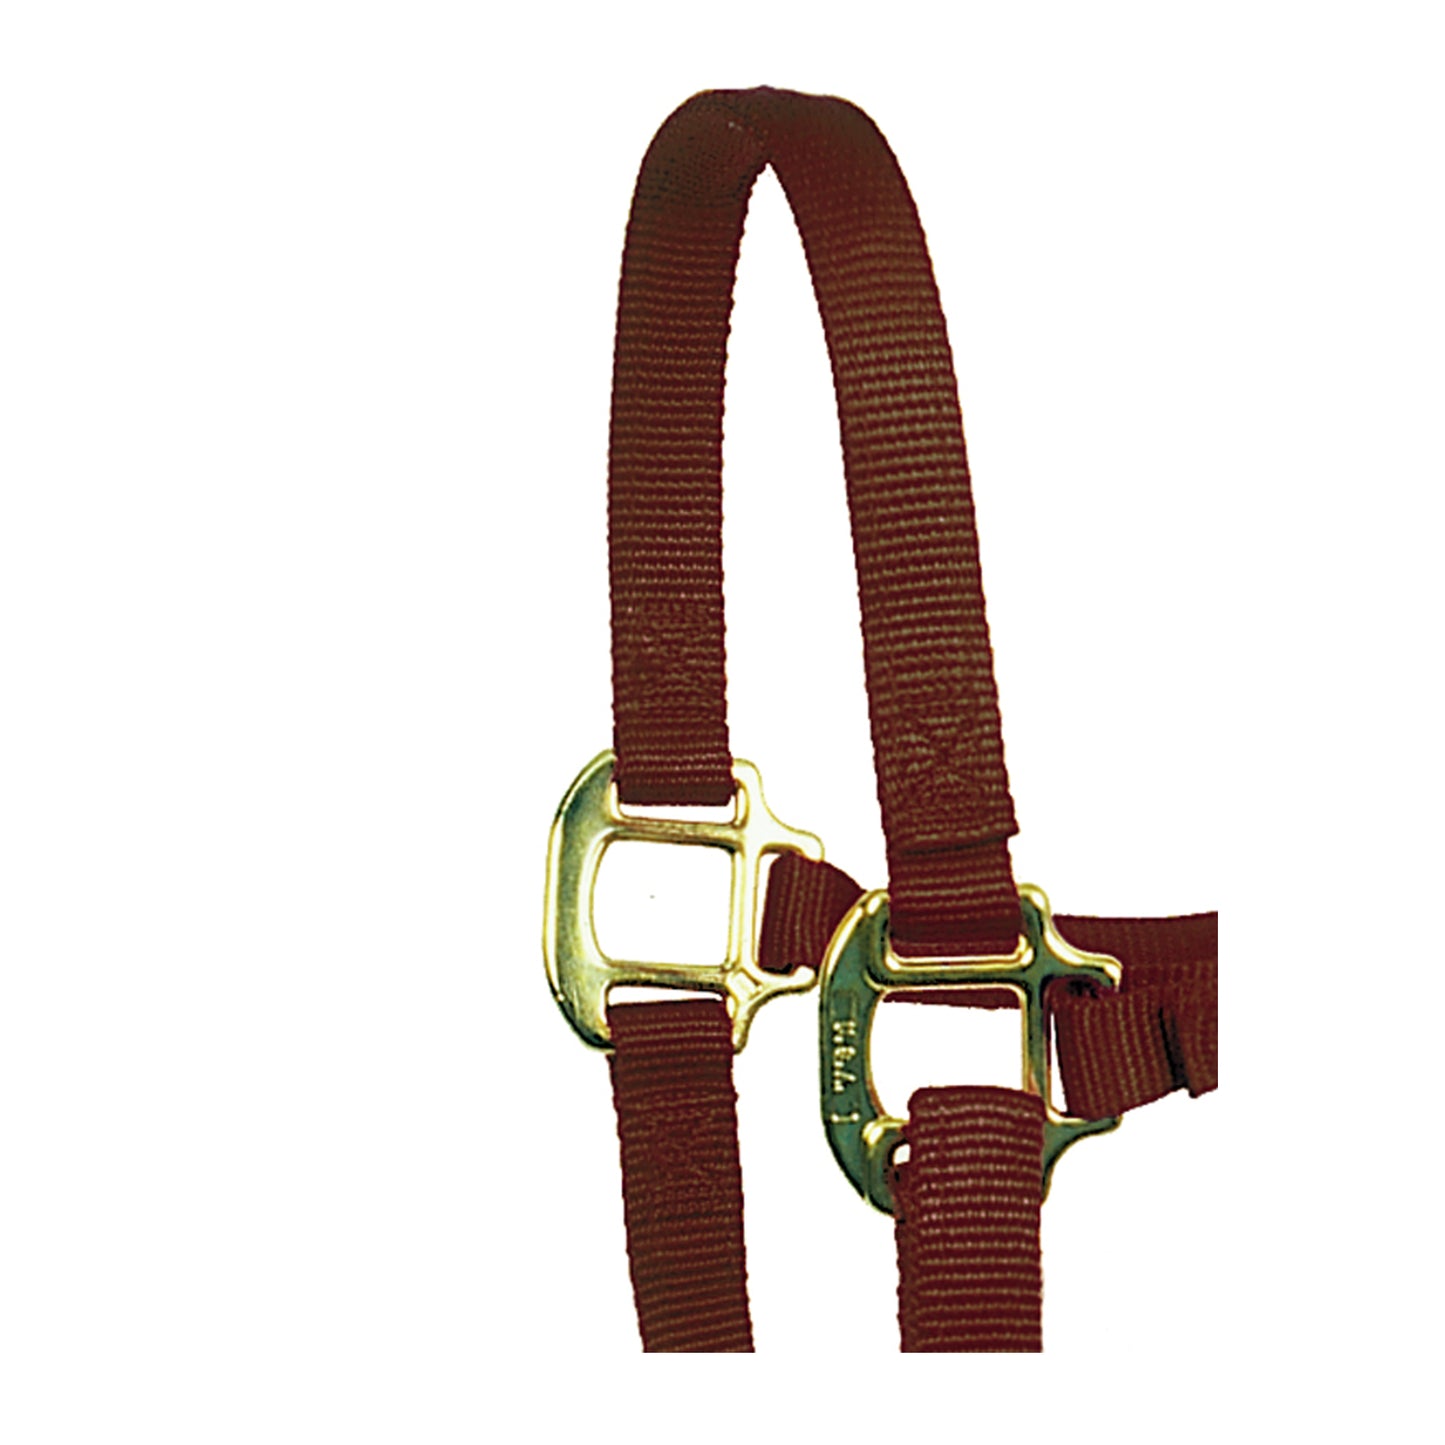 3/4" Comfort Fit Nylon Halter & Bridle Combo with Reins